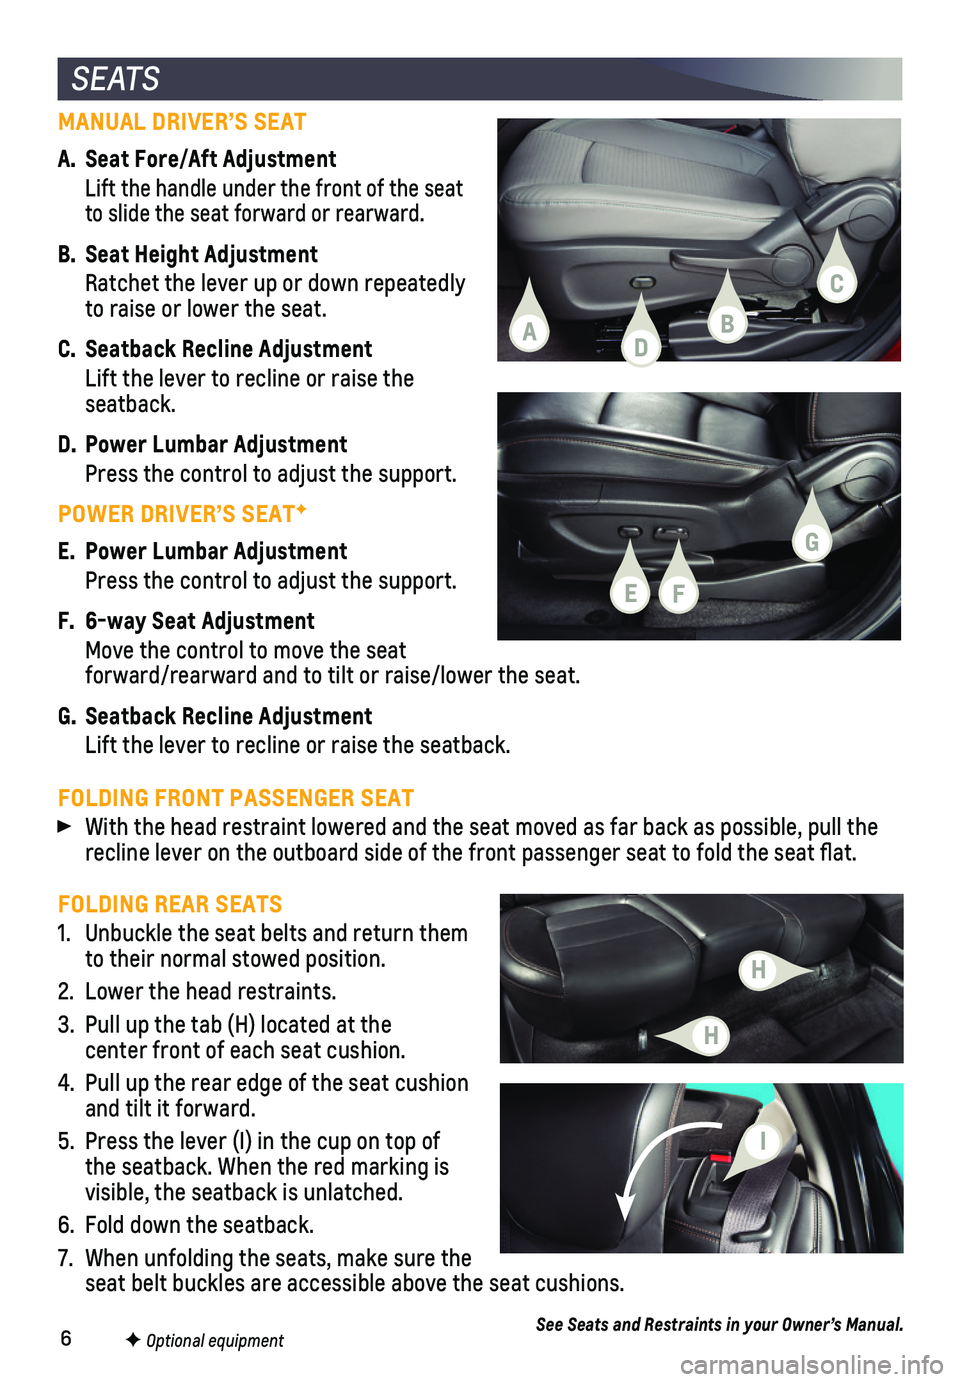 CHEVROLET TRAX 2021  Get To Know Guide 6
FOLDING REAR SEATS
1. Unbuckle the seat belts and return them to their normal stowed position.
2. Lower the head restraints.
3. Pull up the tab (H) located at the  center front of each seat cushion.